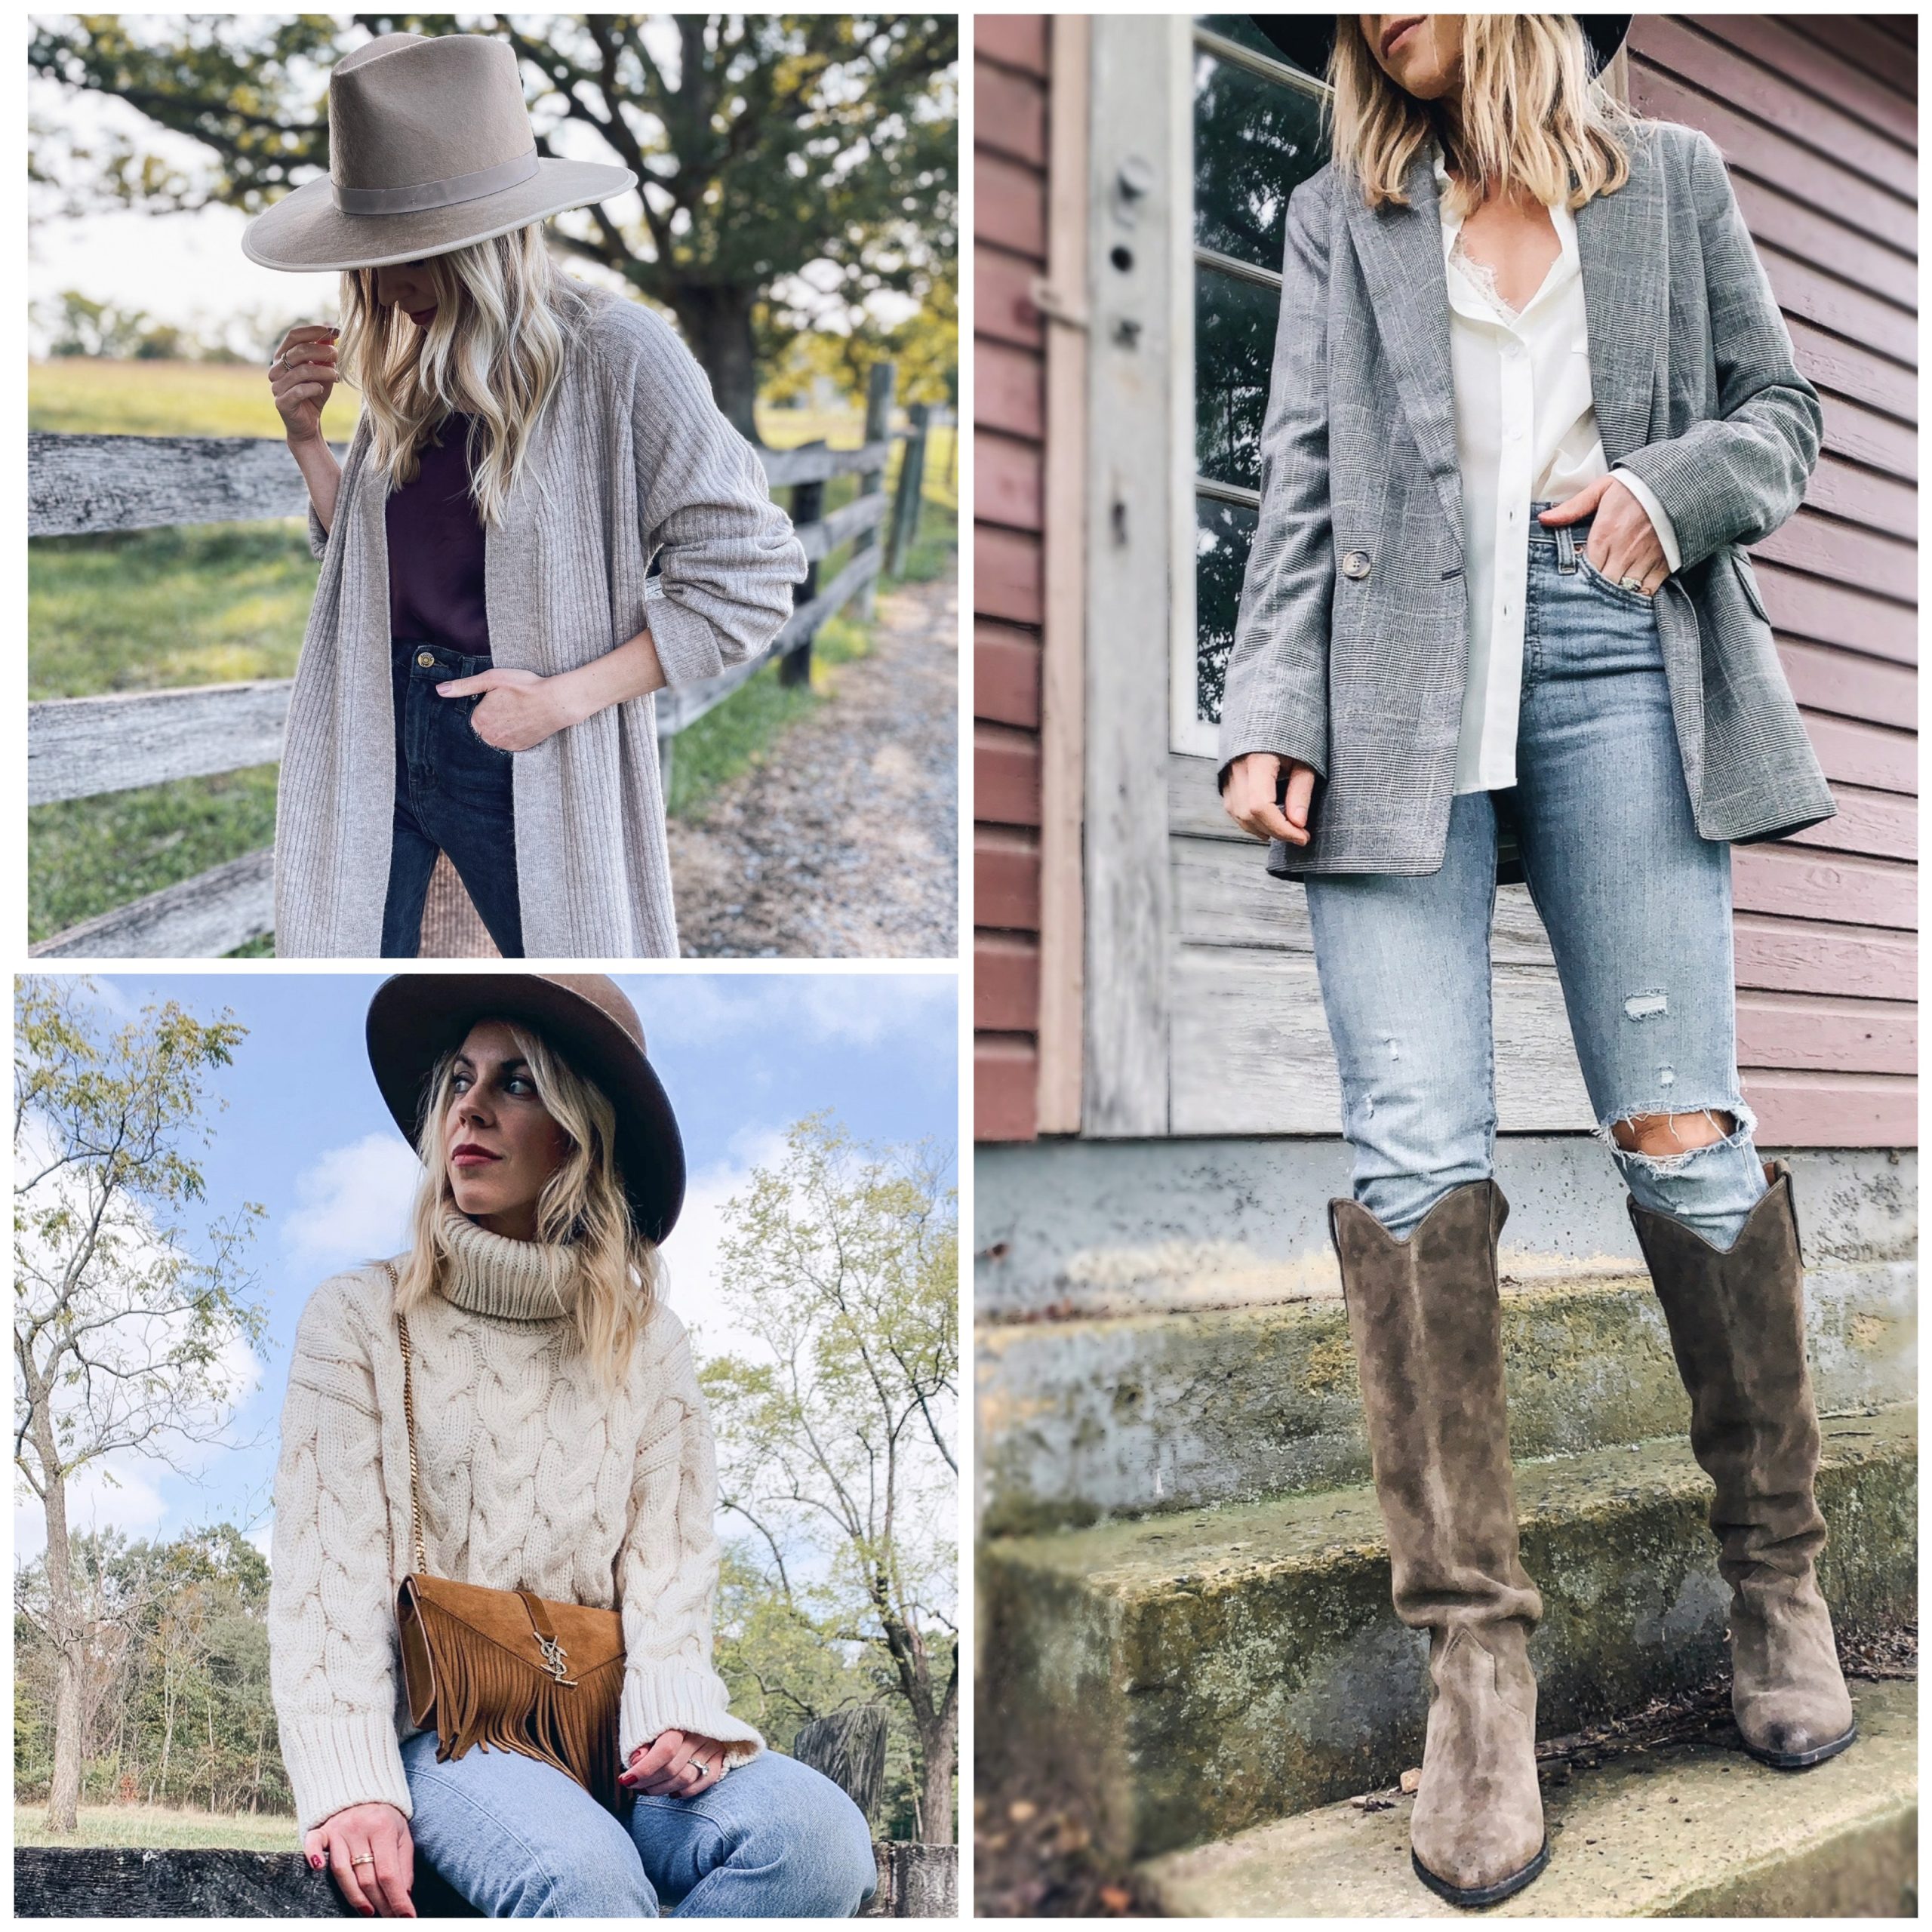 How to Wear Cowboy Boots - The Effortless Chic